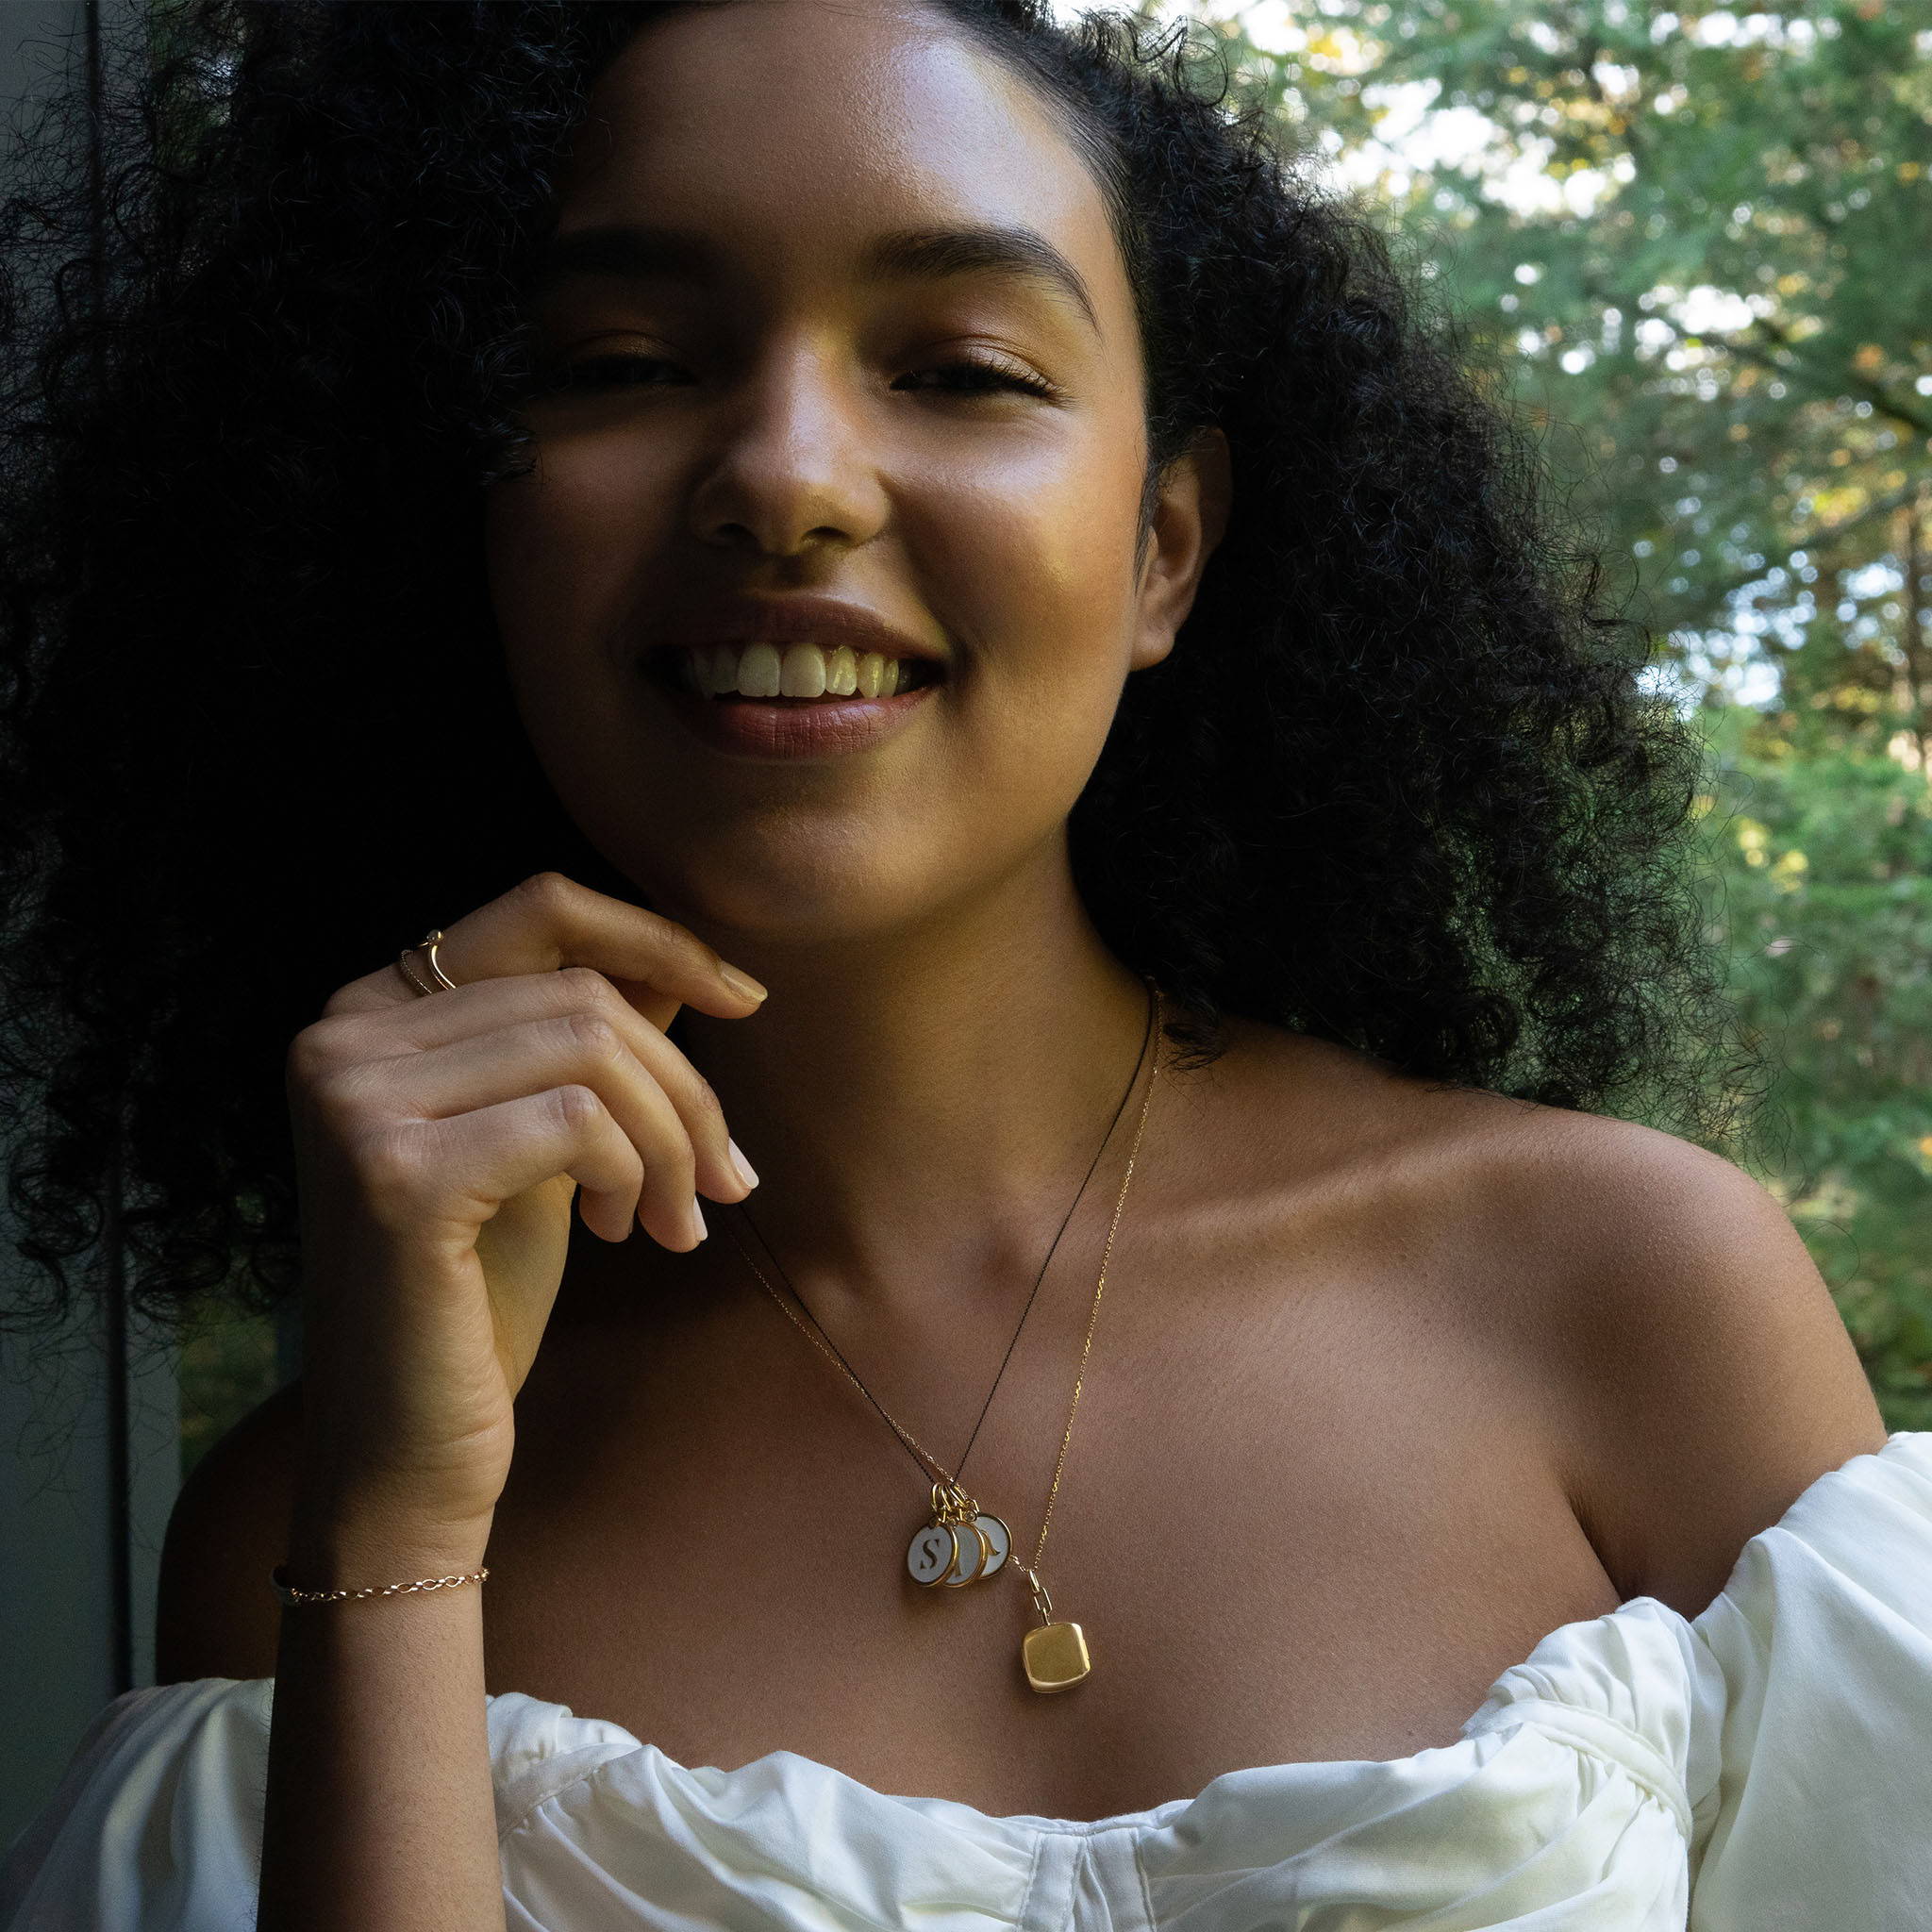 THOUGHTS ON THE NATURE OF SUSTAINABLE JEWELRY